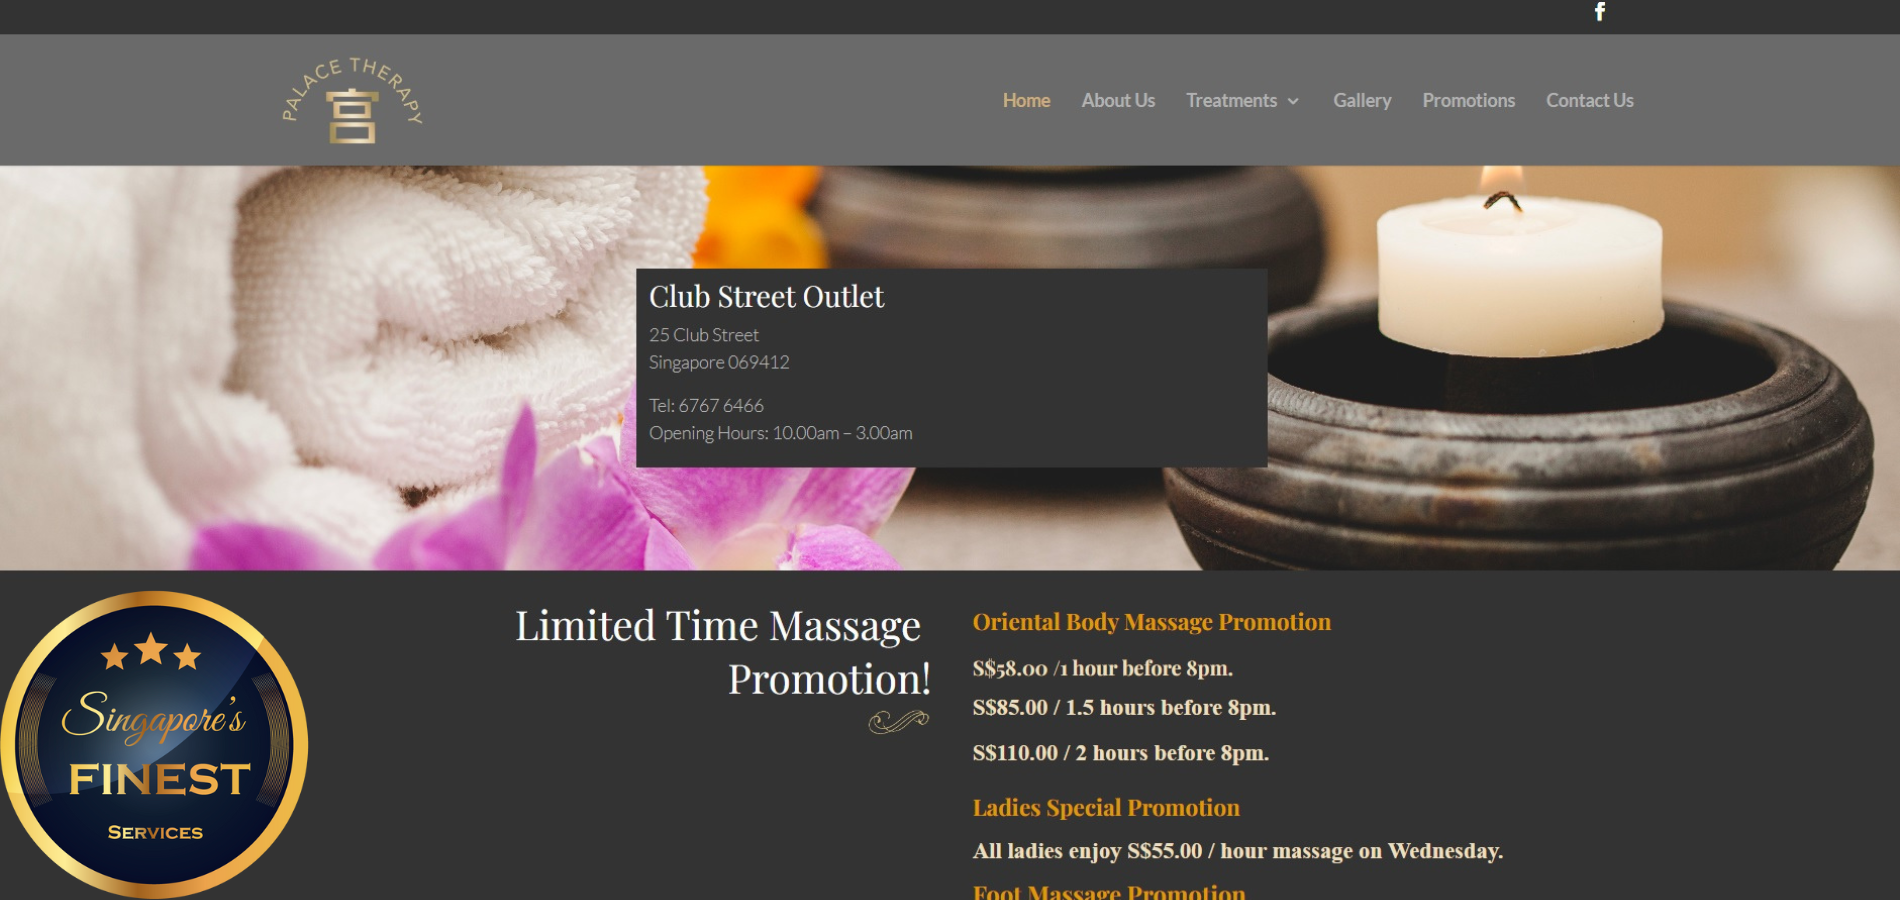 The Finest Spa and Massage in Singapore